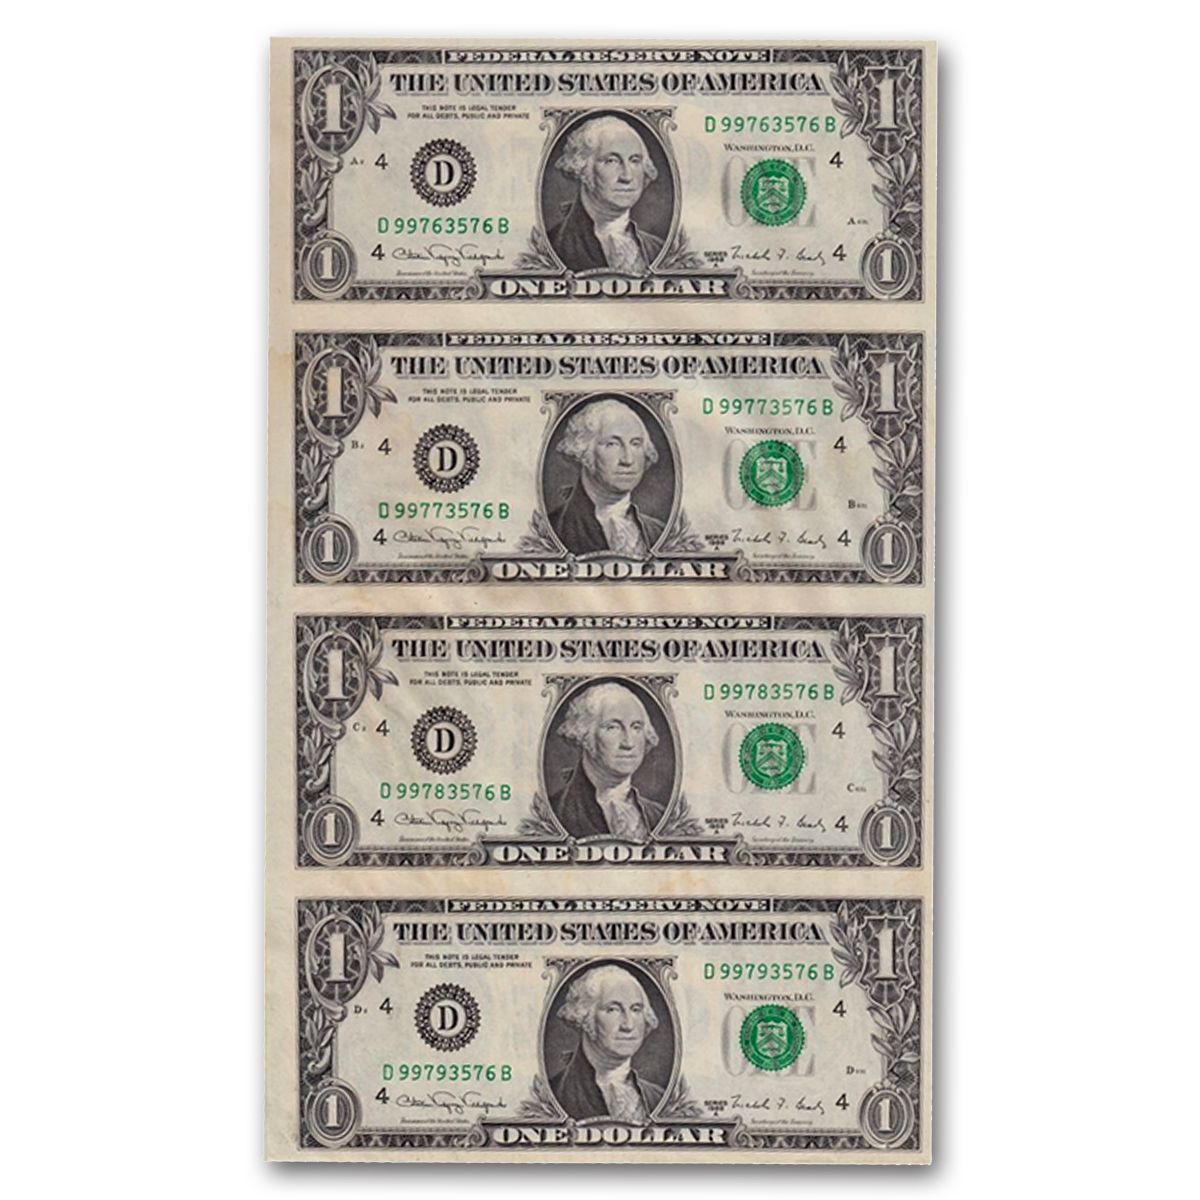 $1 X  3 Legal USA 1 DOLLAR*Real Currency NOTES*RARE BILLS Details about   3 UNCUT SHEET $ 1 